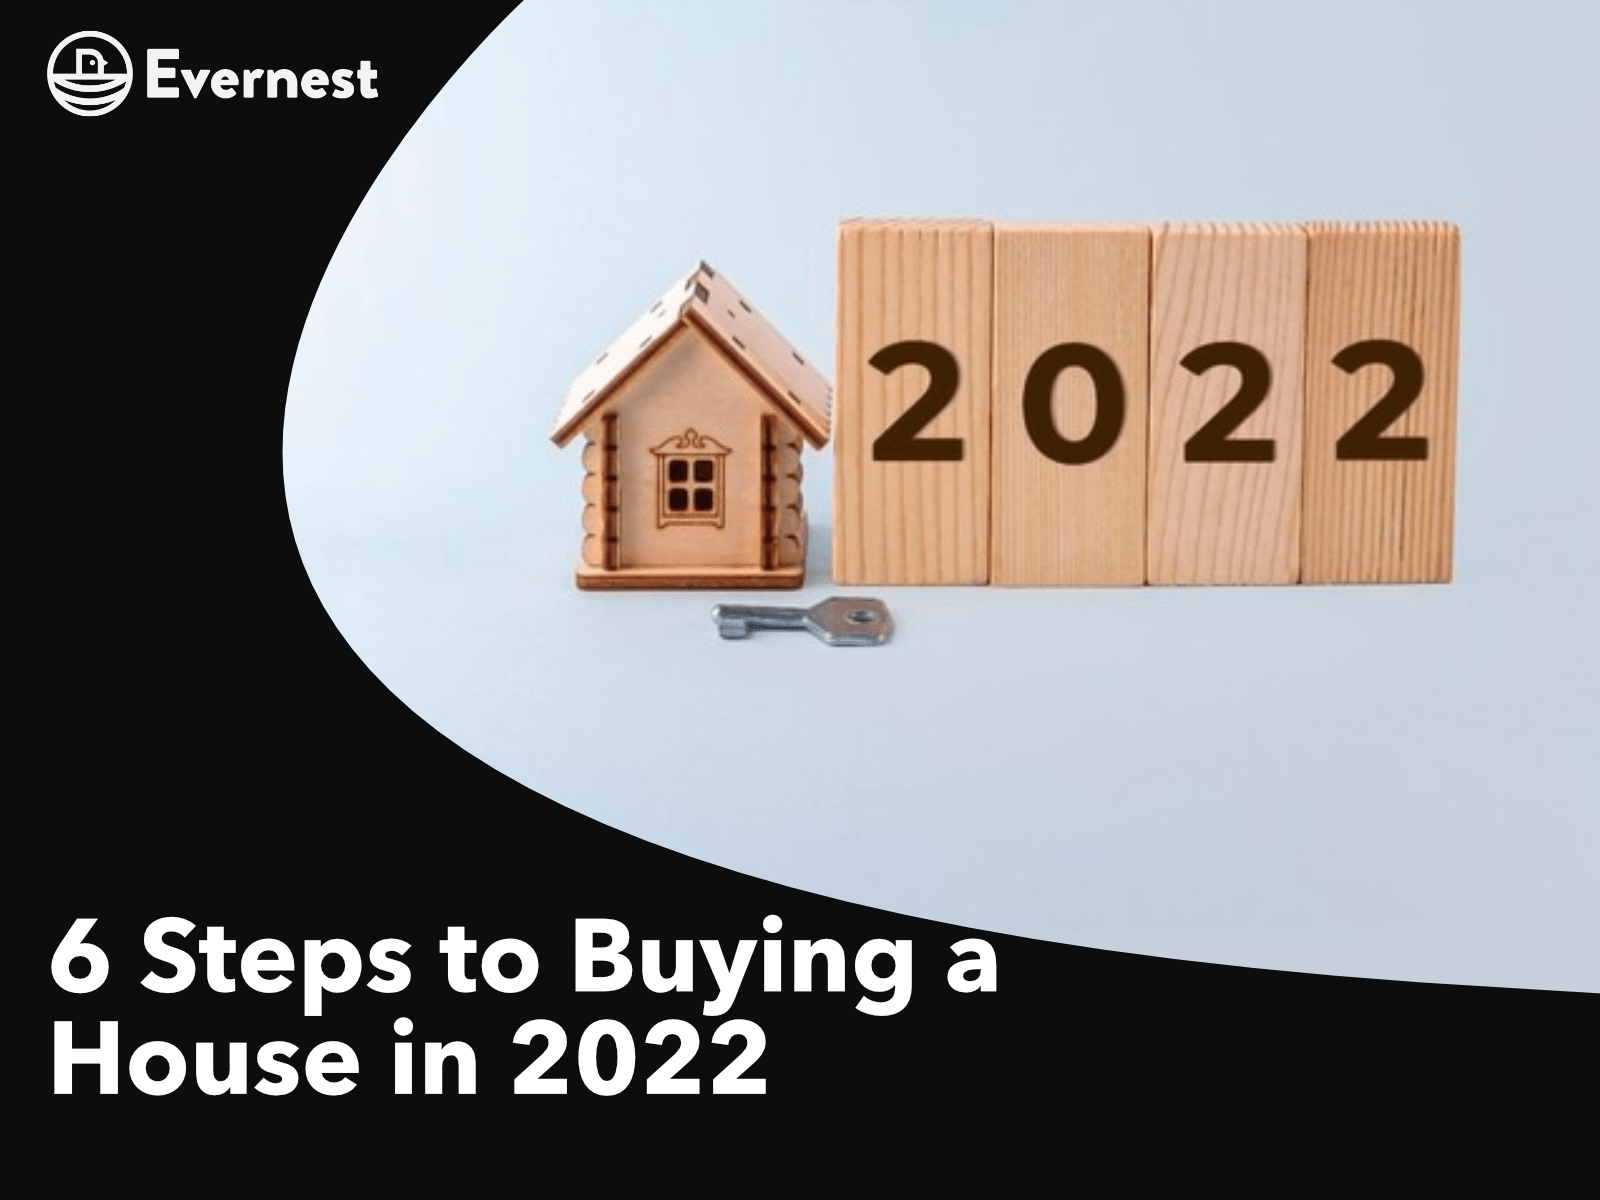 6 Steps to Buying a House in 2022